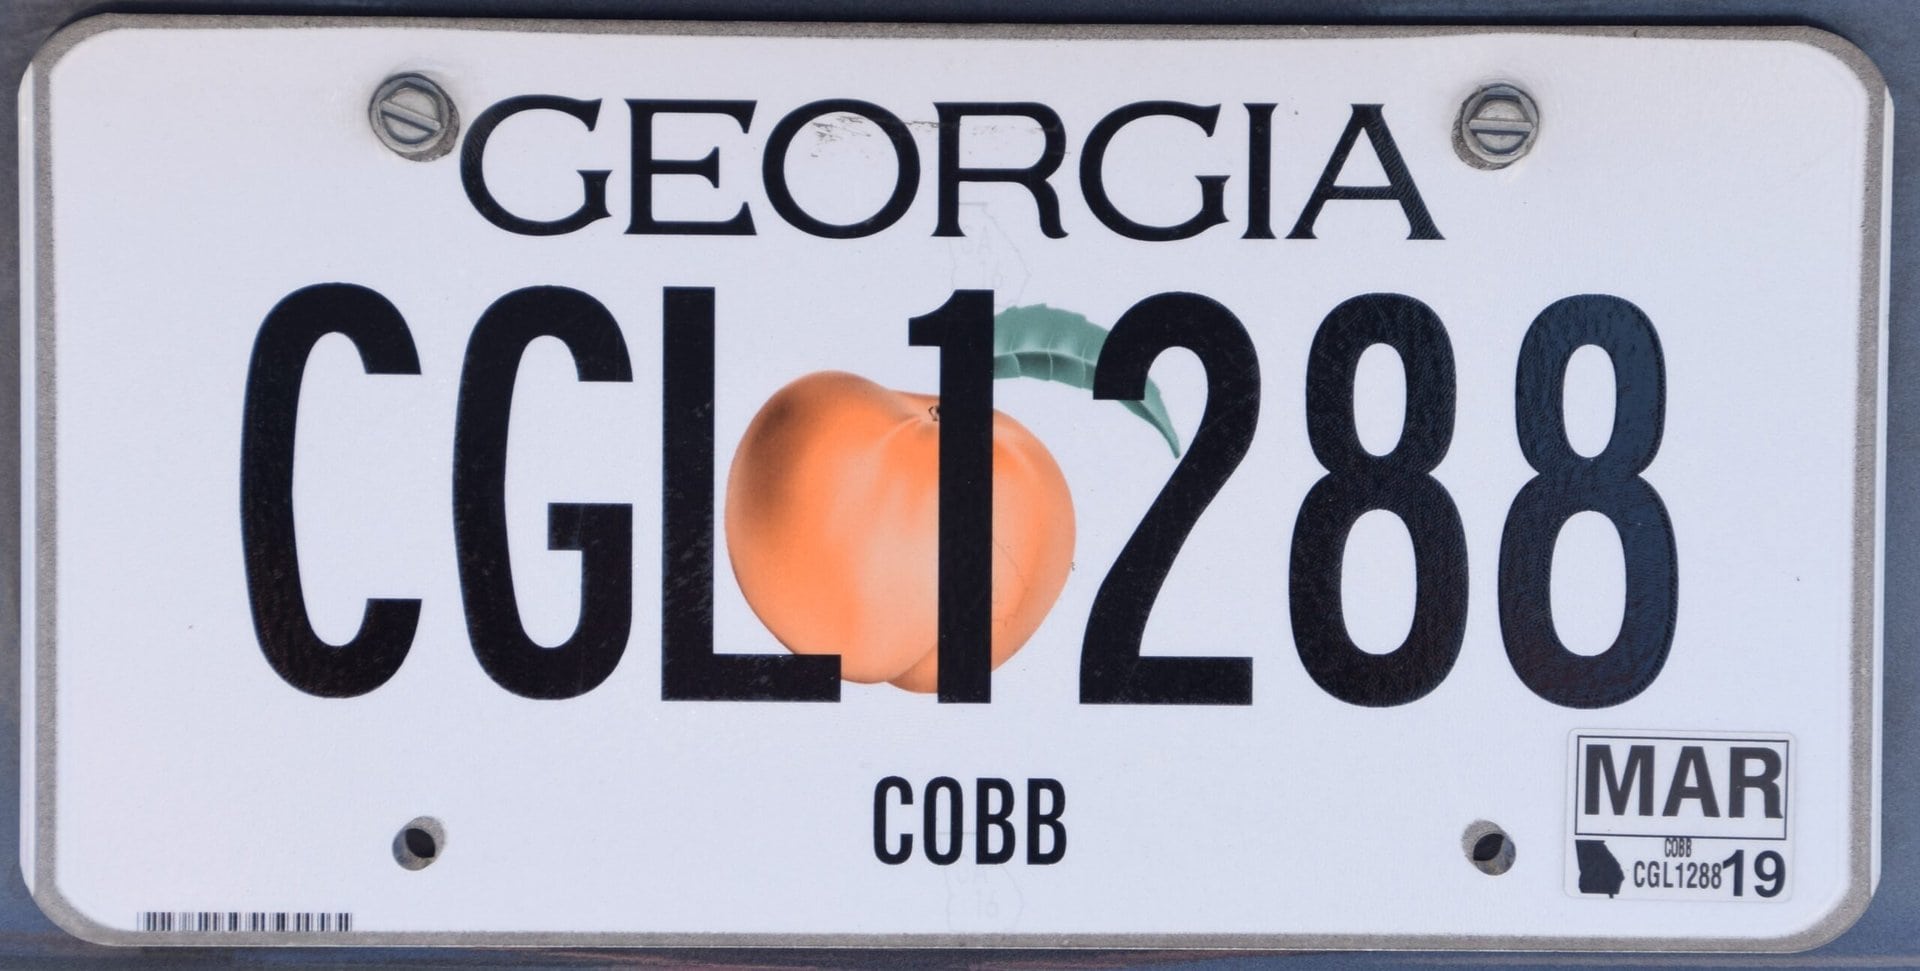 How To Get Rid Of Old License Plates In Georgia - Wheels For Wishes